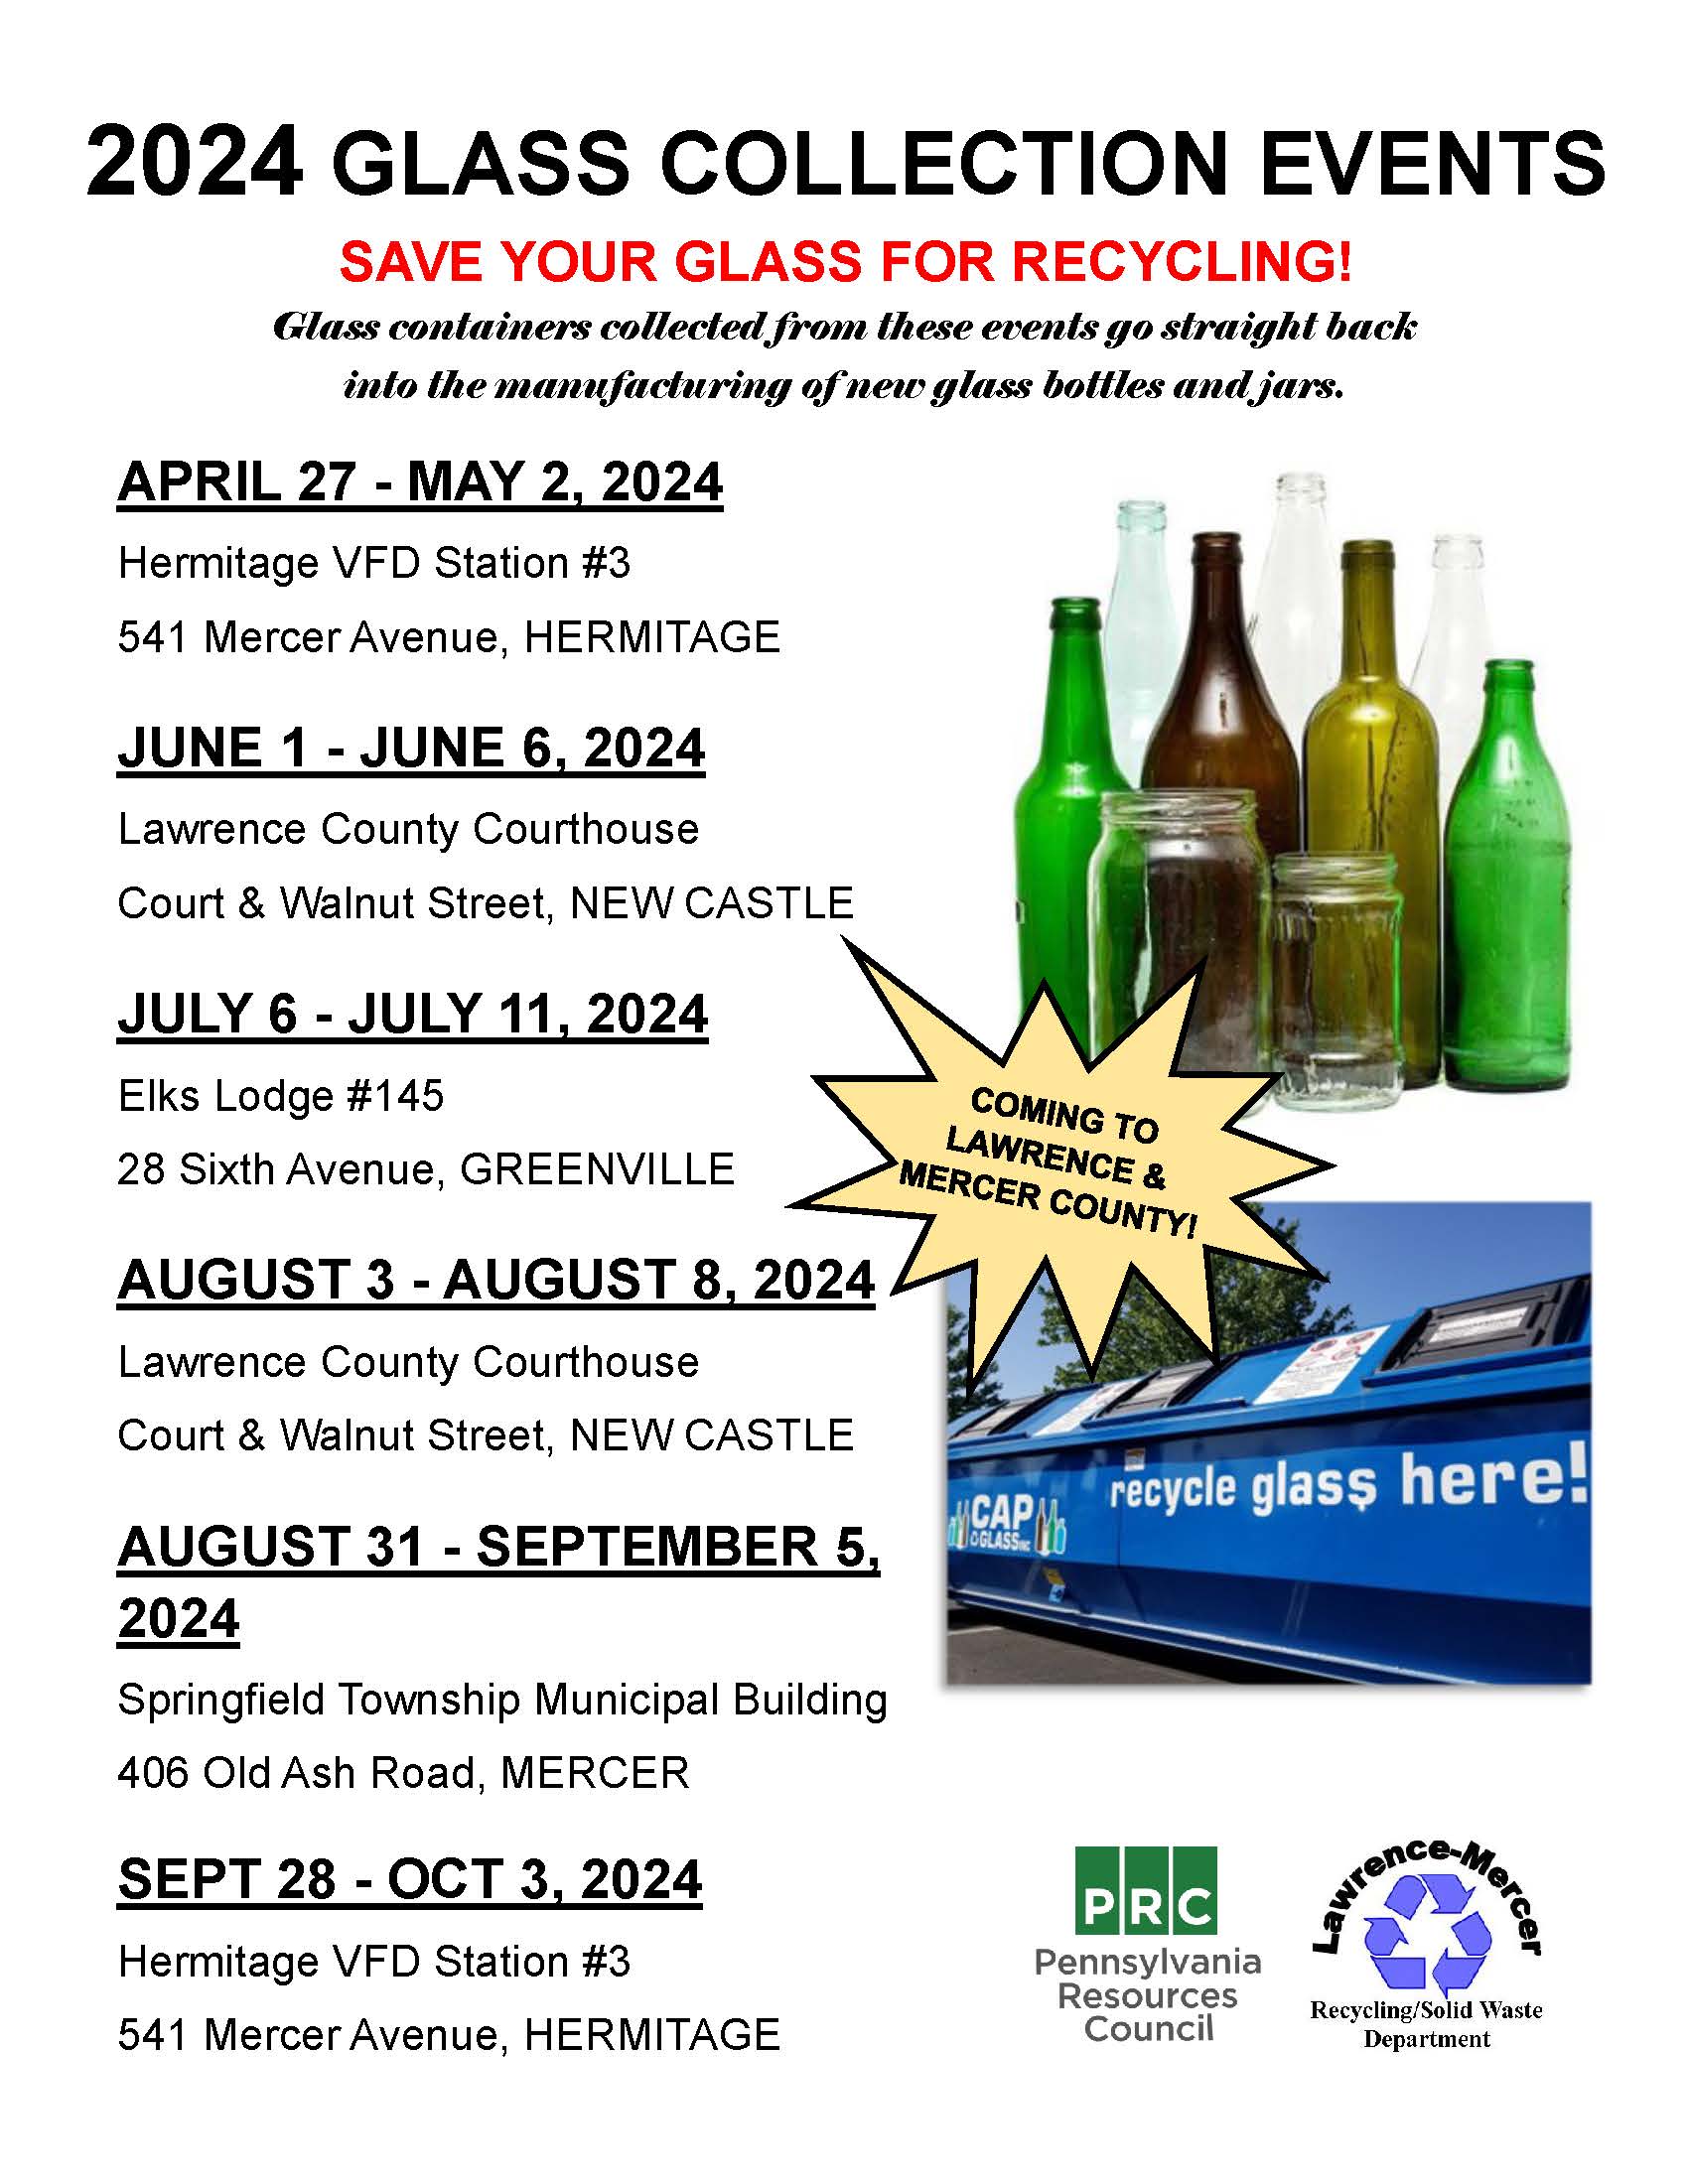 2024 Glass Collection Events Flier